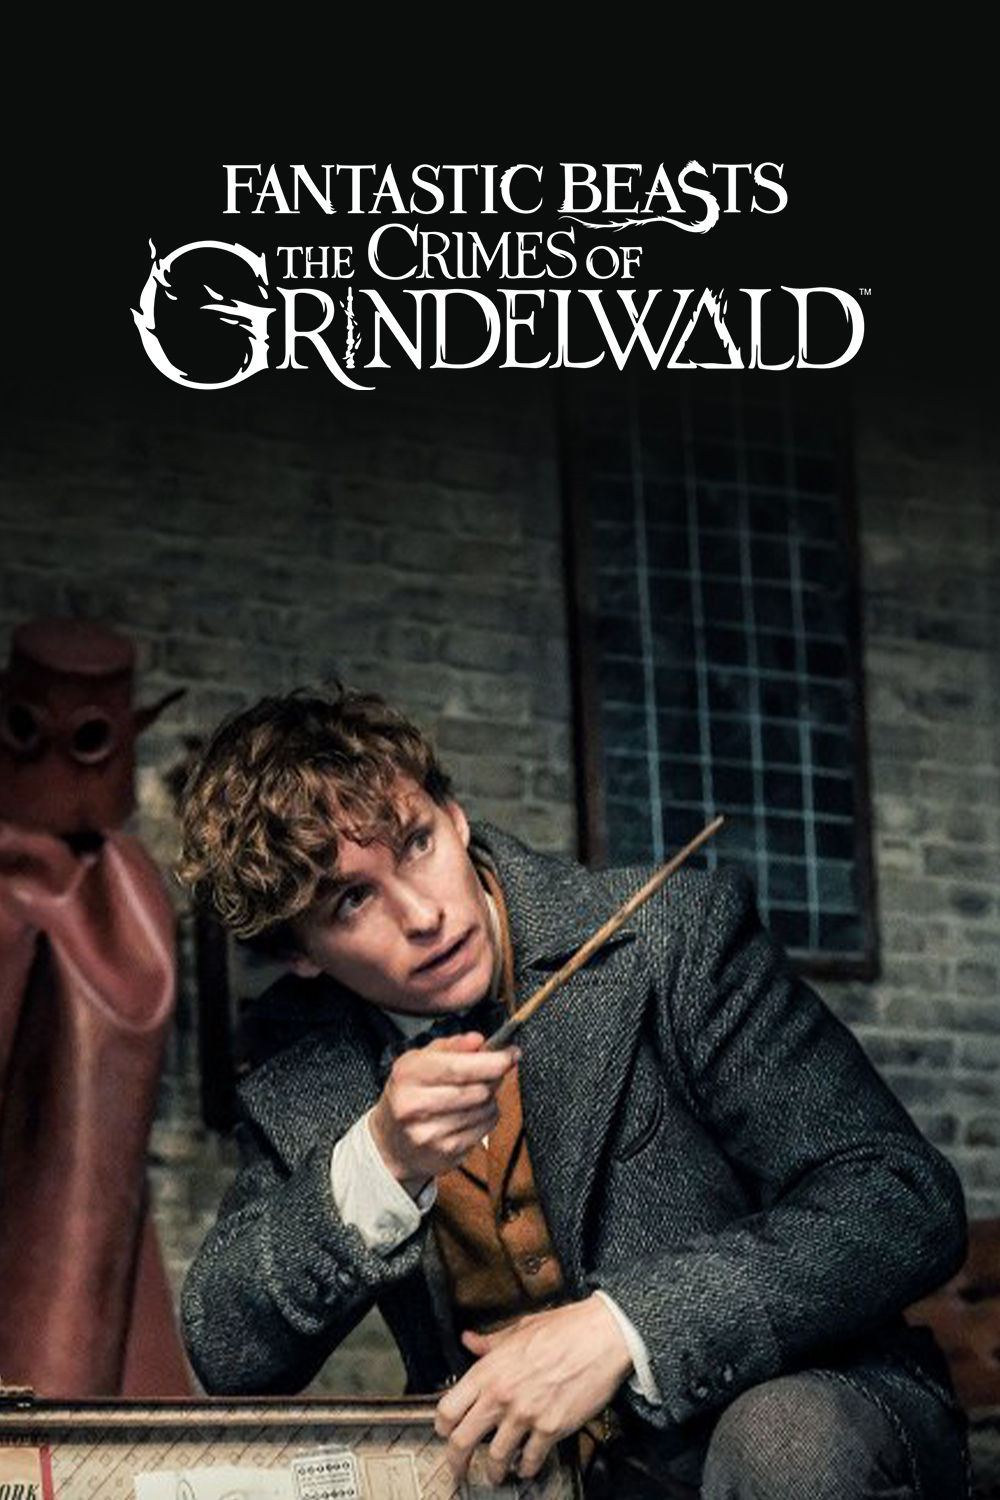 Watch Fantastic Beasts: The Crimes of Grindelwald Online